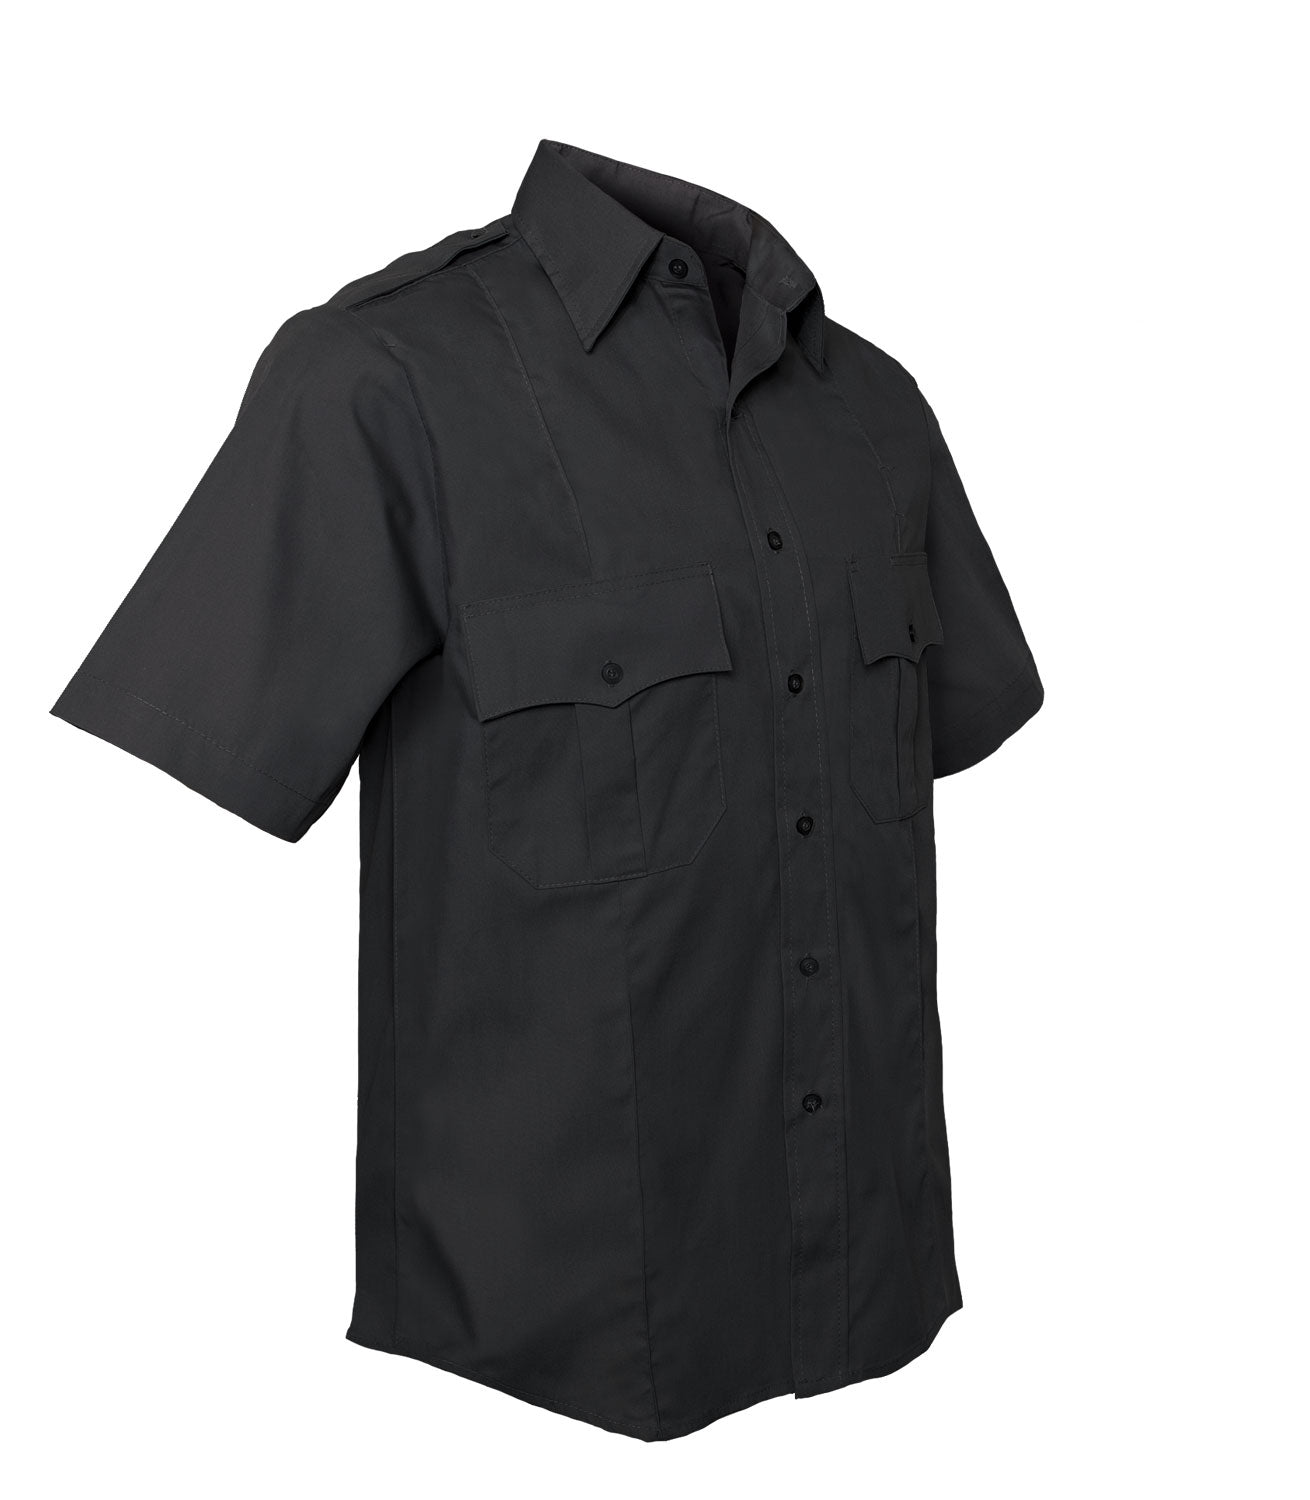 [Public Safety] Poly/Combed Cotton Poplin Weave Police & Security Short-Sleeve Uniform Shirts